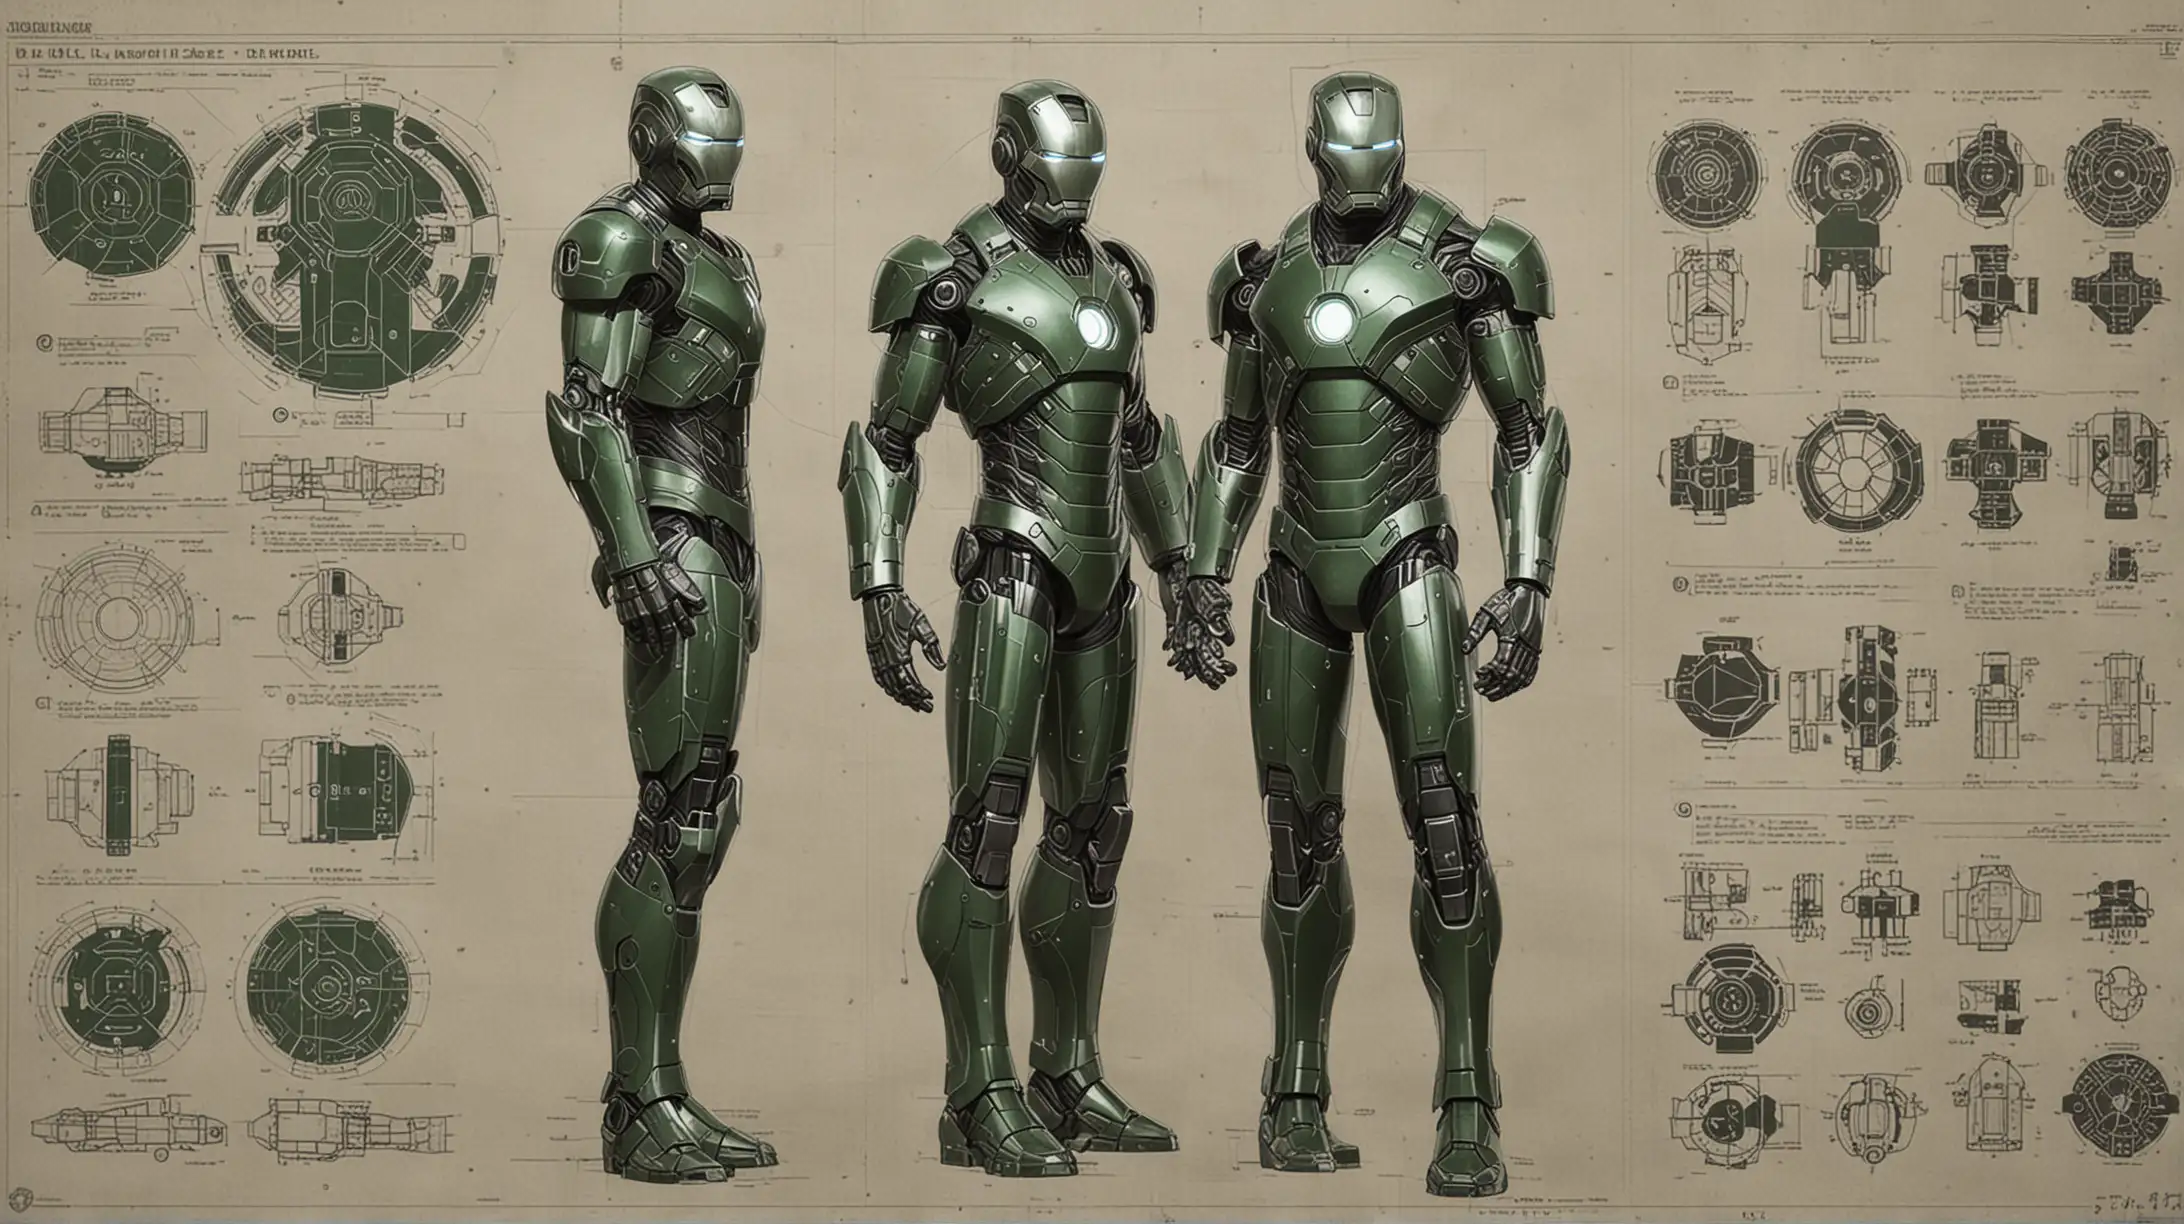 Iron Man Mark 33 Suit Blueprints Painted Green and Black with Titanium Silver Arc Reactor